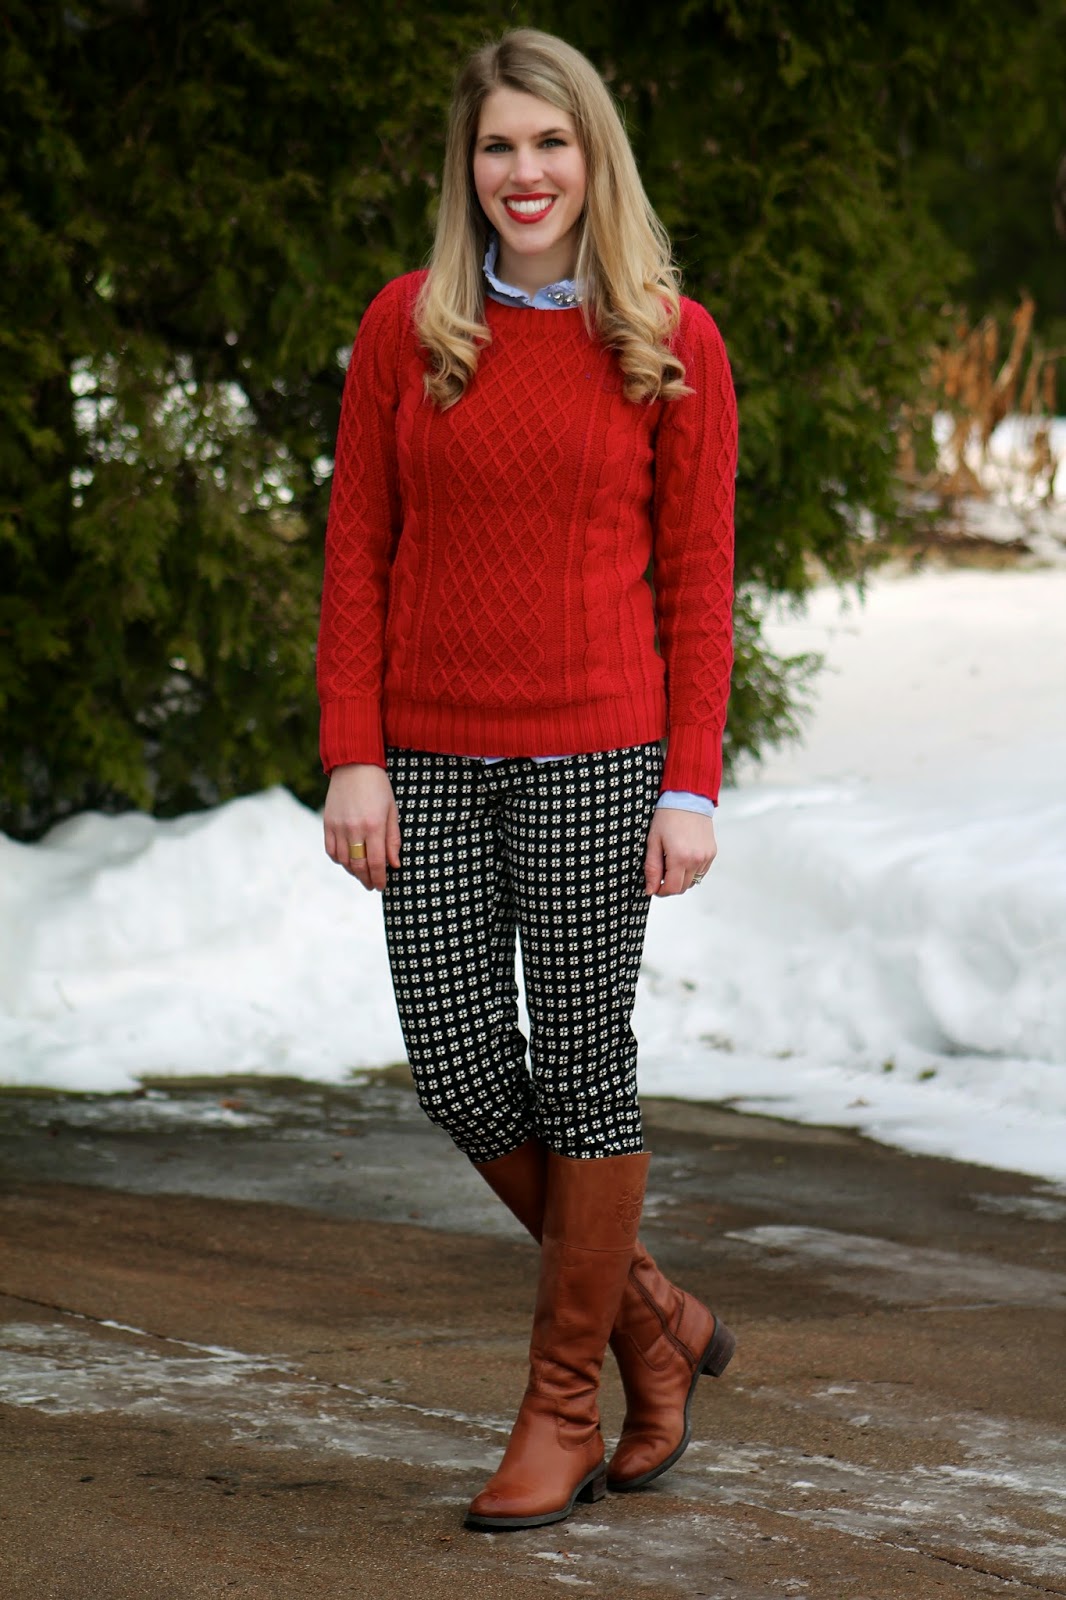 I do deClaire: Red Sweater and Pixie Pants